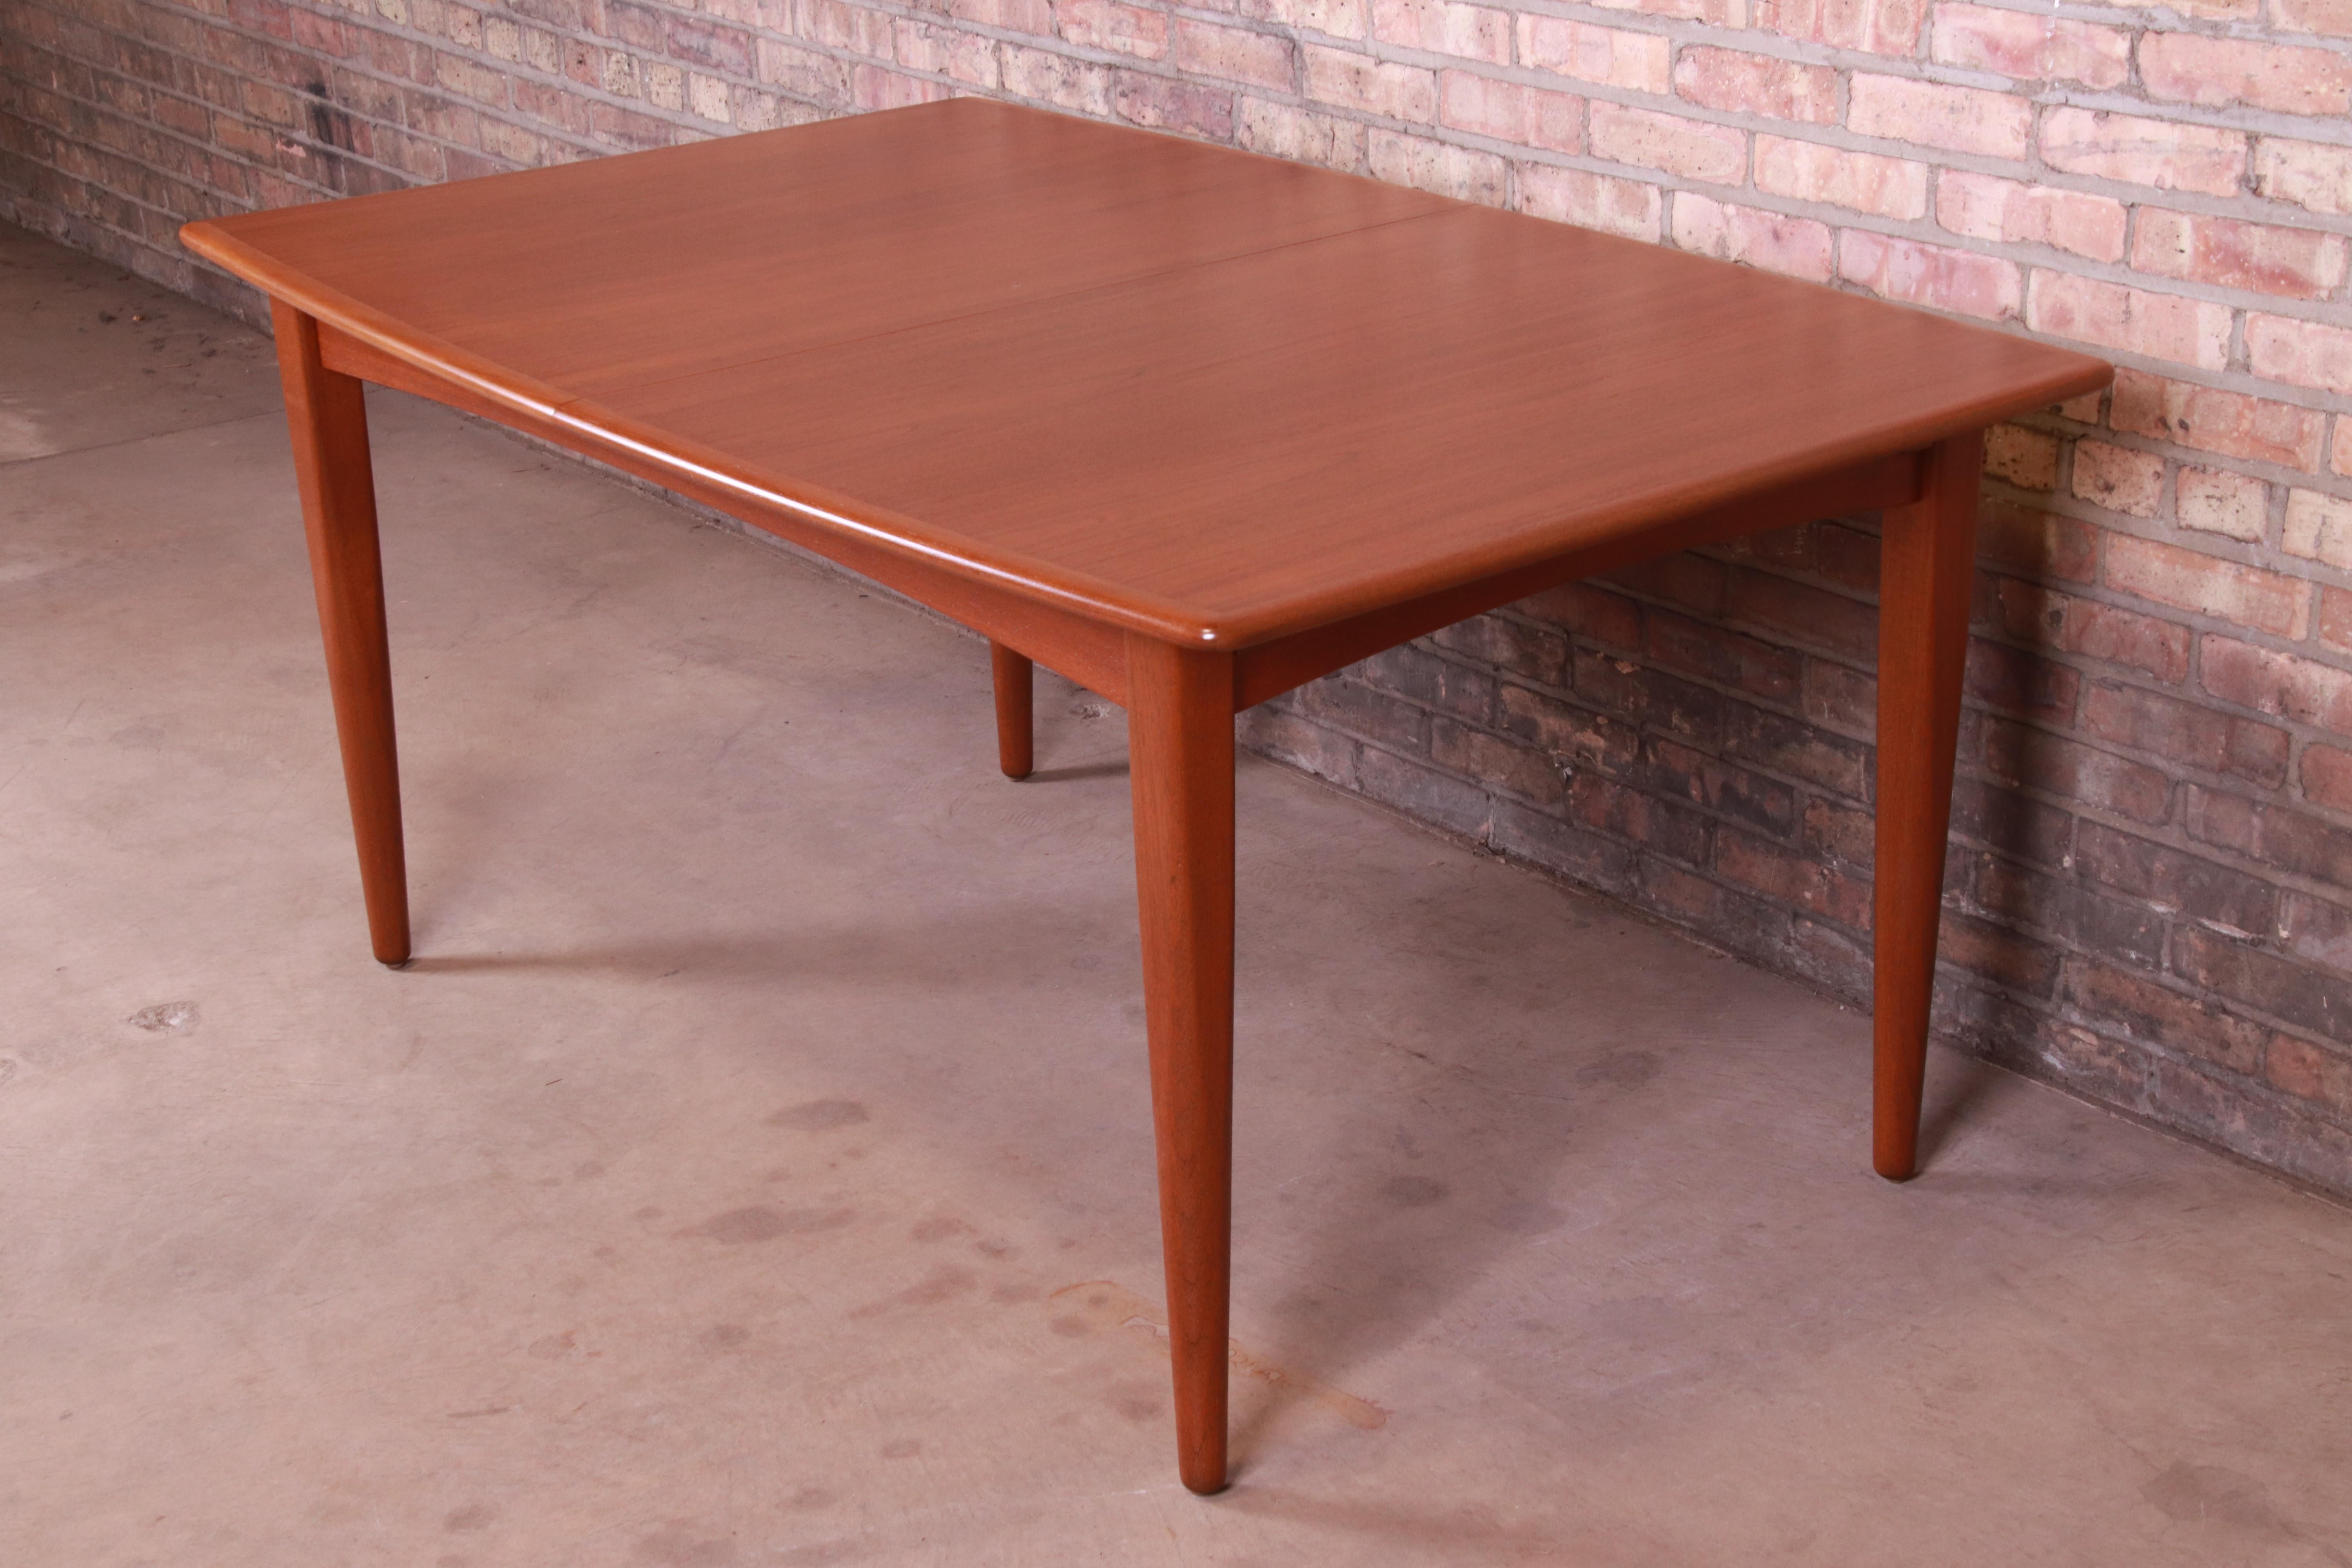 Falster Danish Modern Teak Boat-Shaped Extension Dining Table, Newly Restored 1